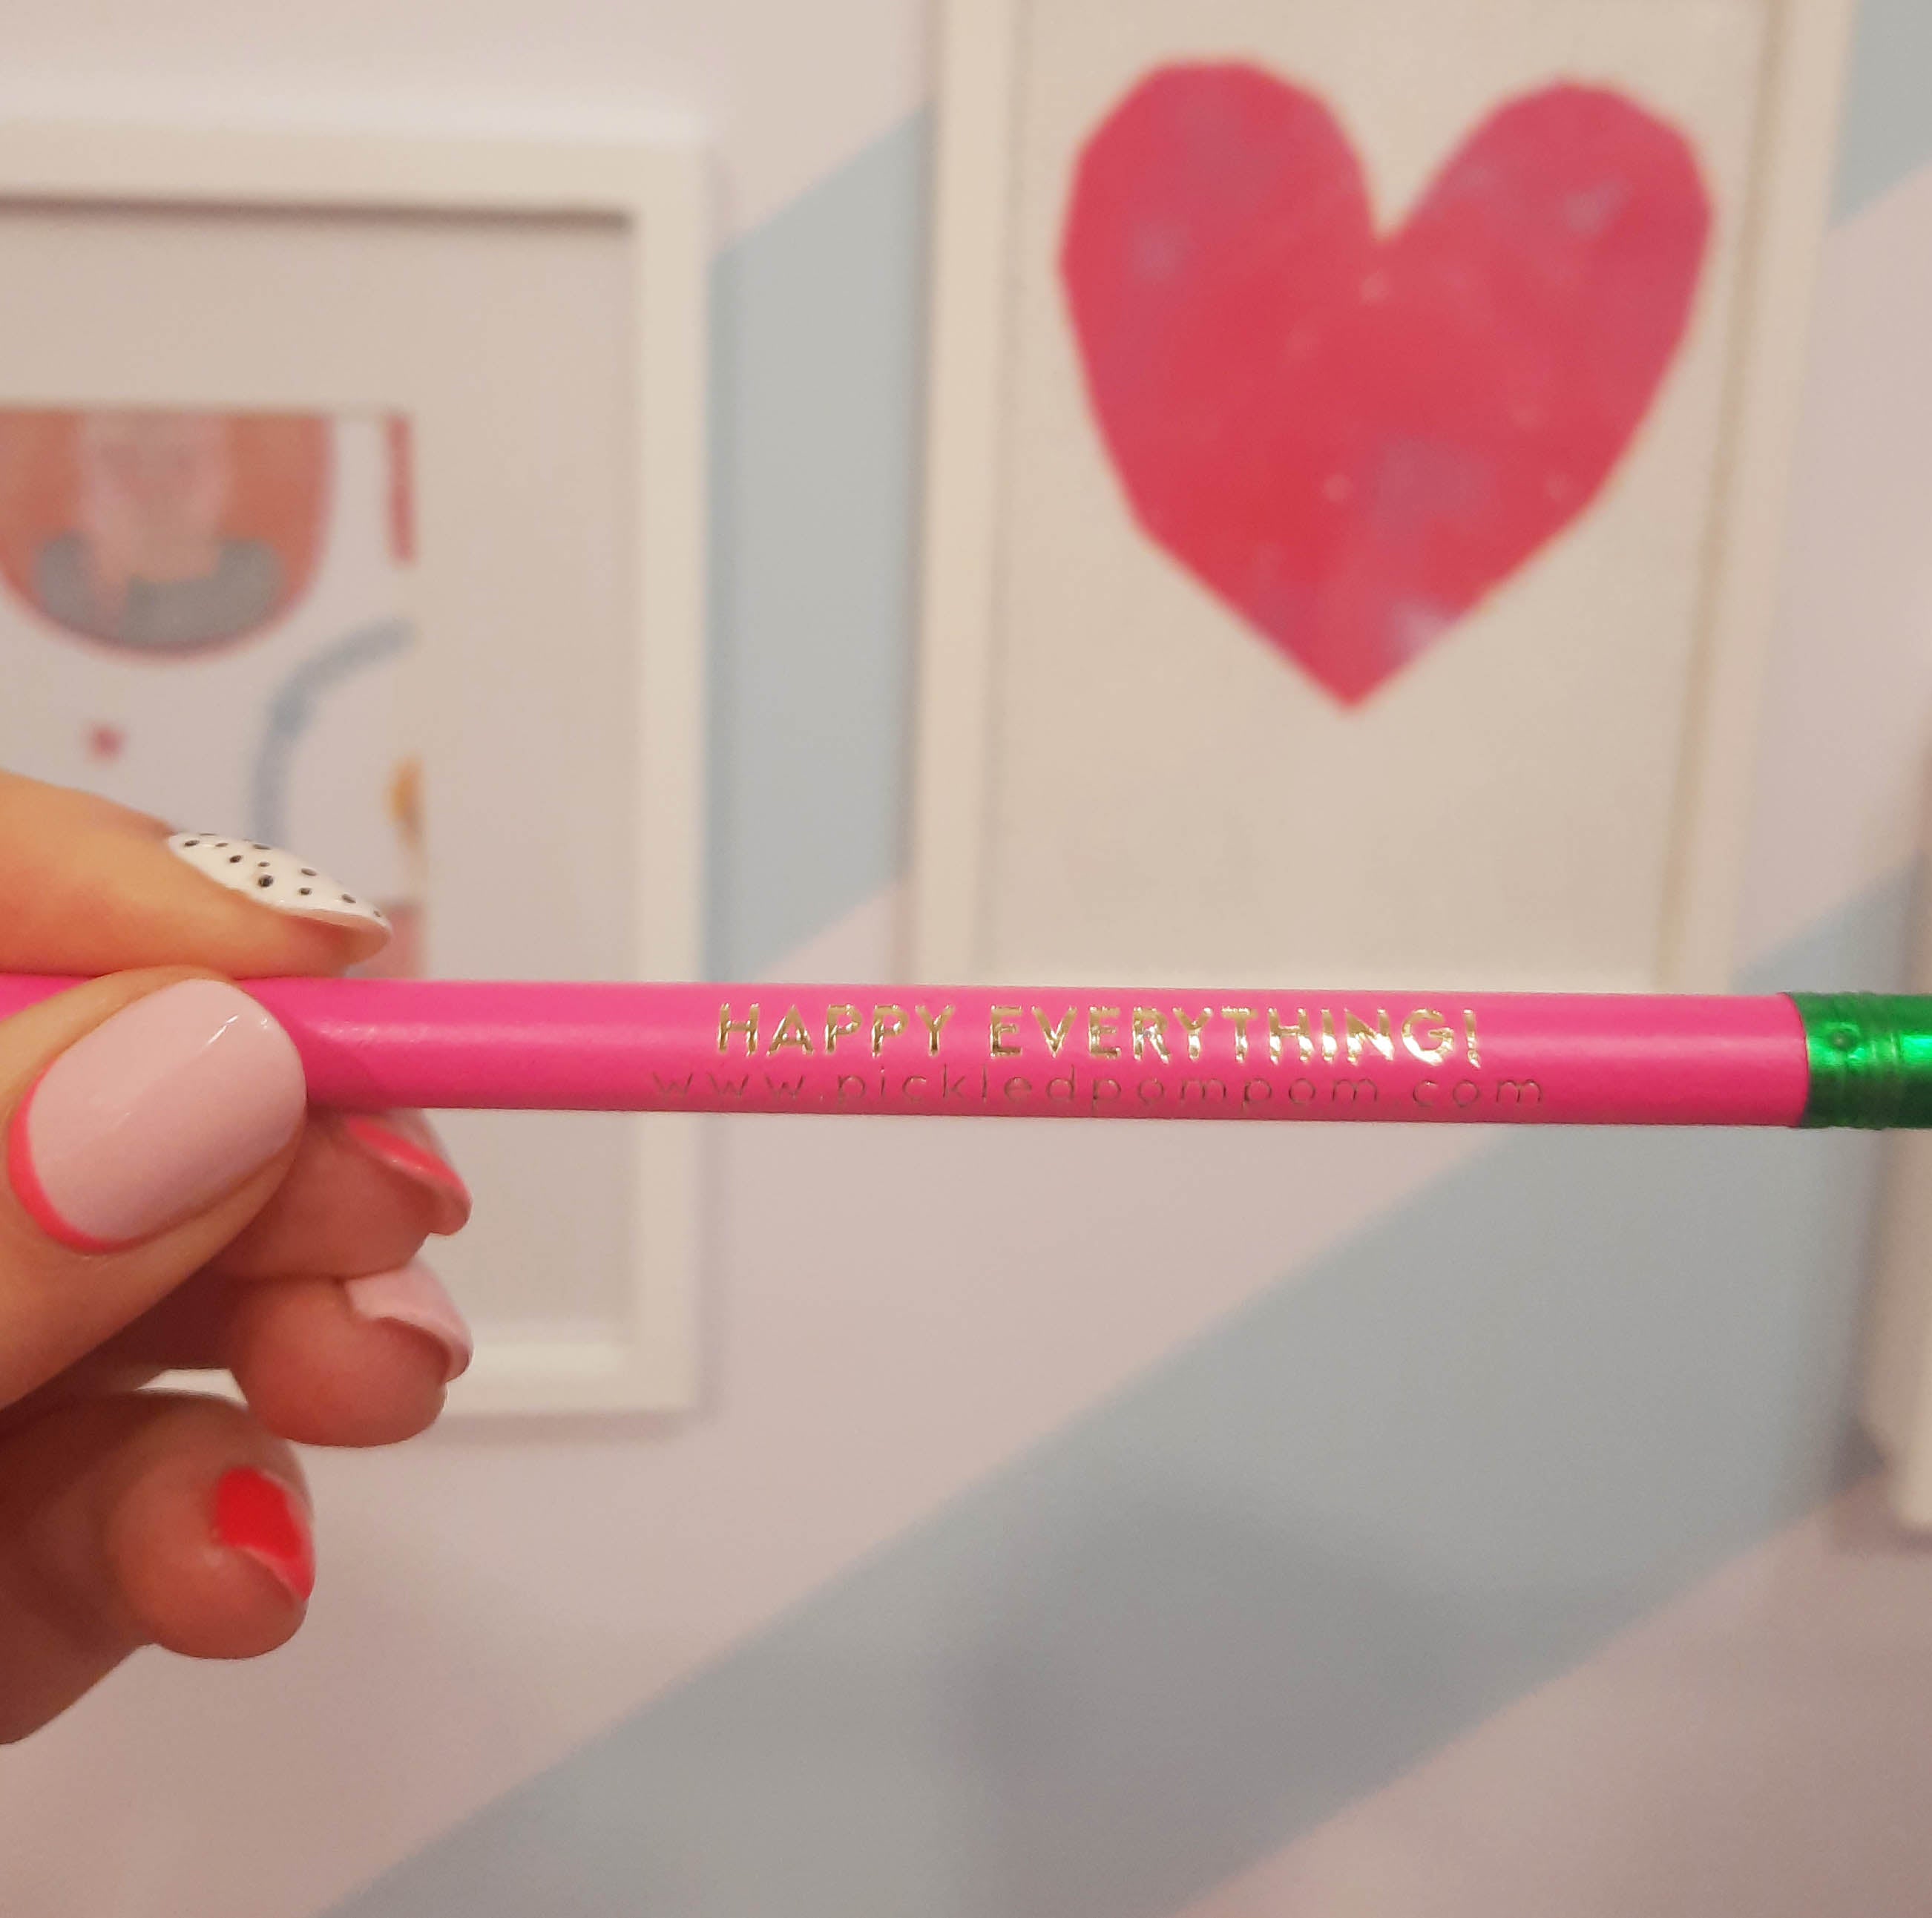 super extra gorgeous neon branded pencil!